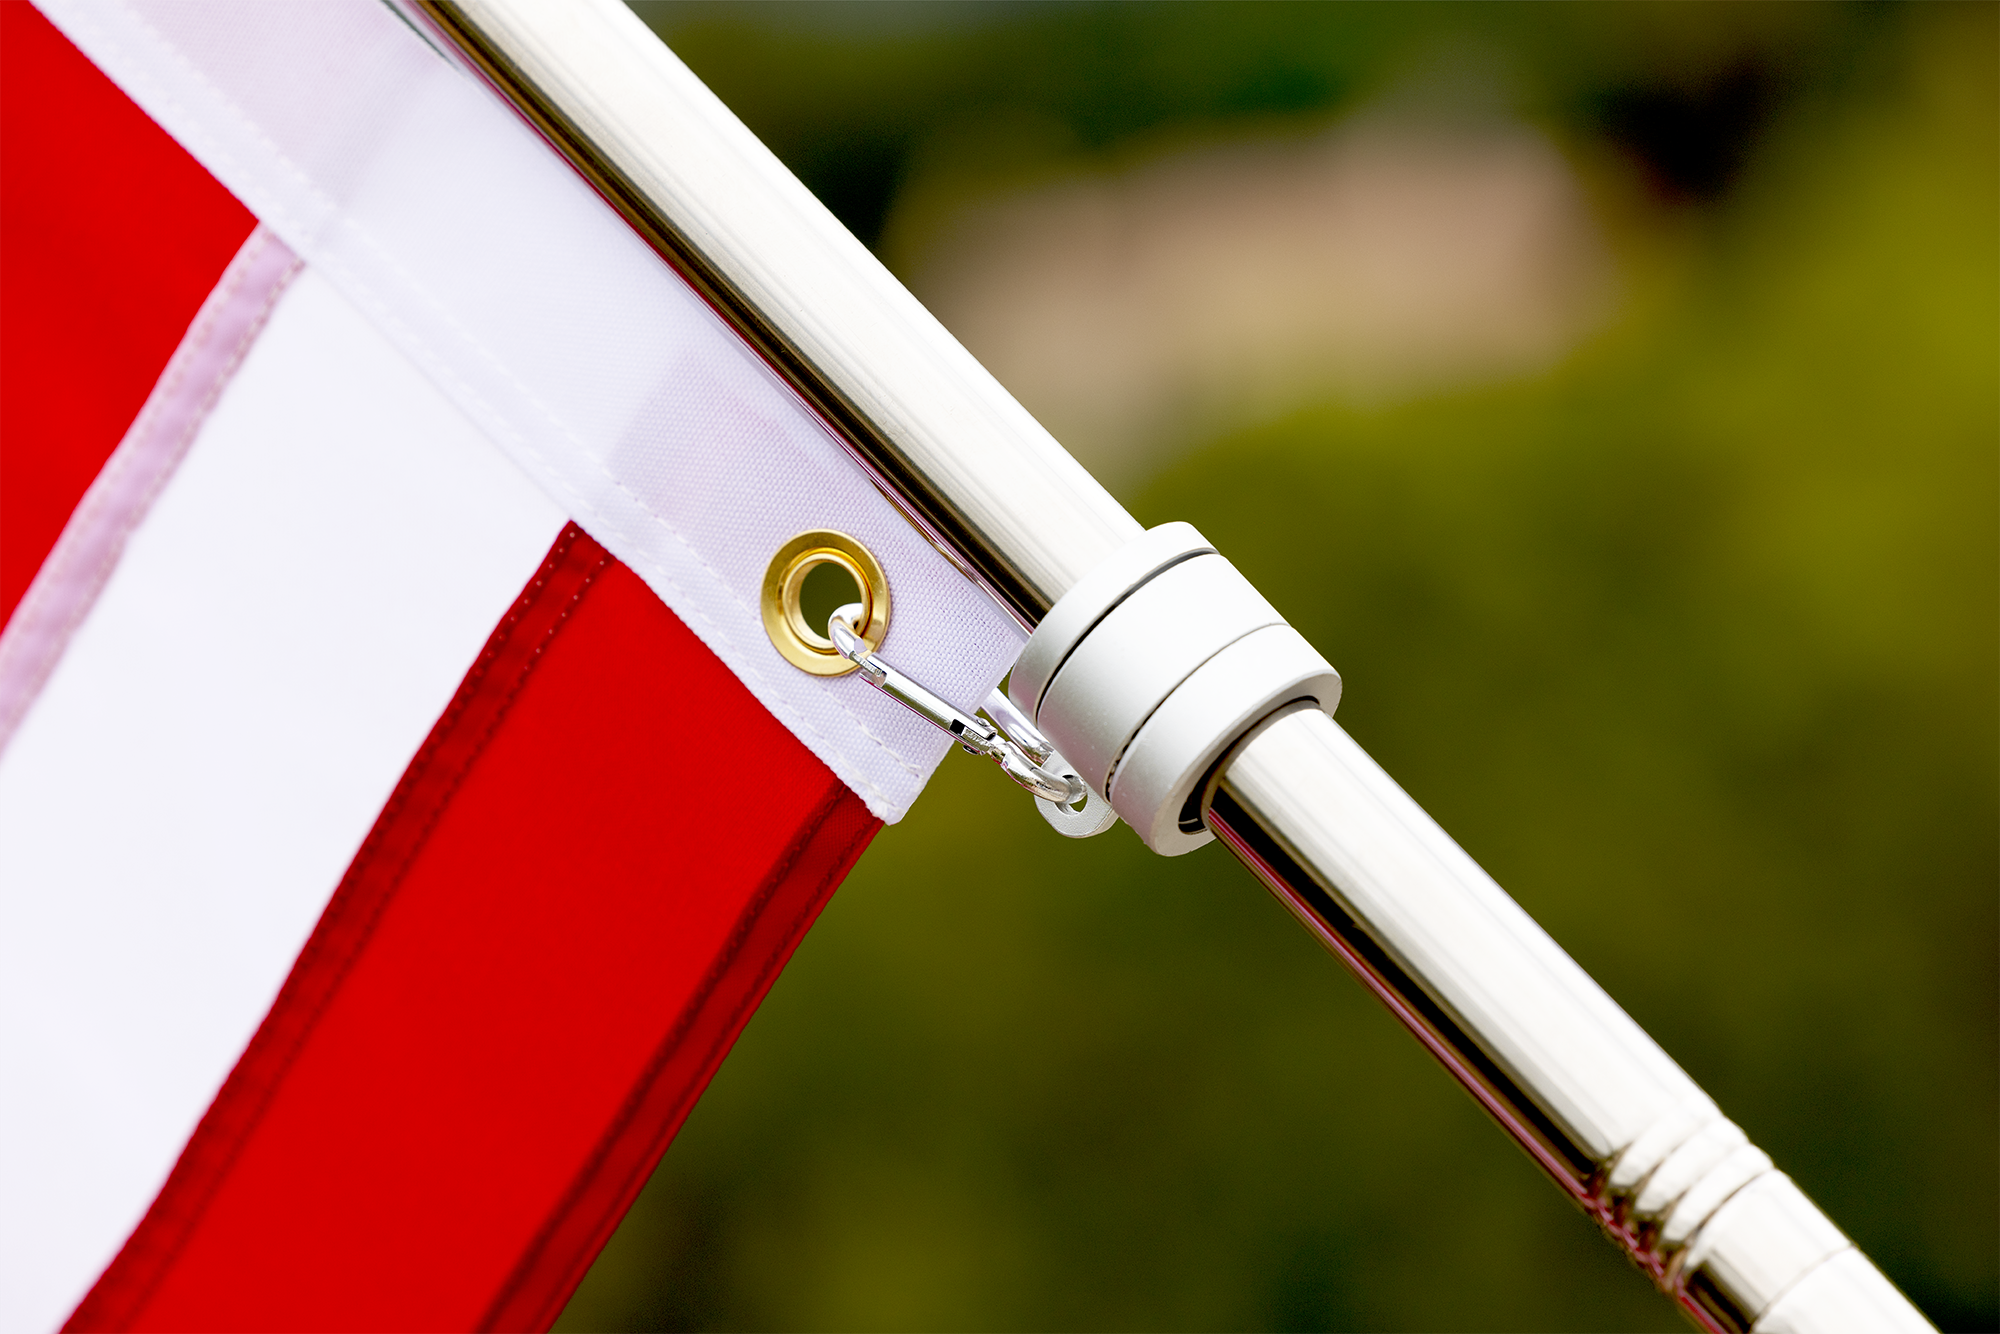 Close-up of a red and white striped flag attached to a pole with a metal grommet and clip, pre-assembled by the manufacturer, with a blurred green background.